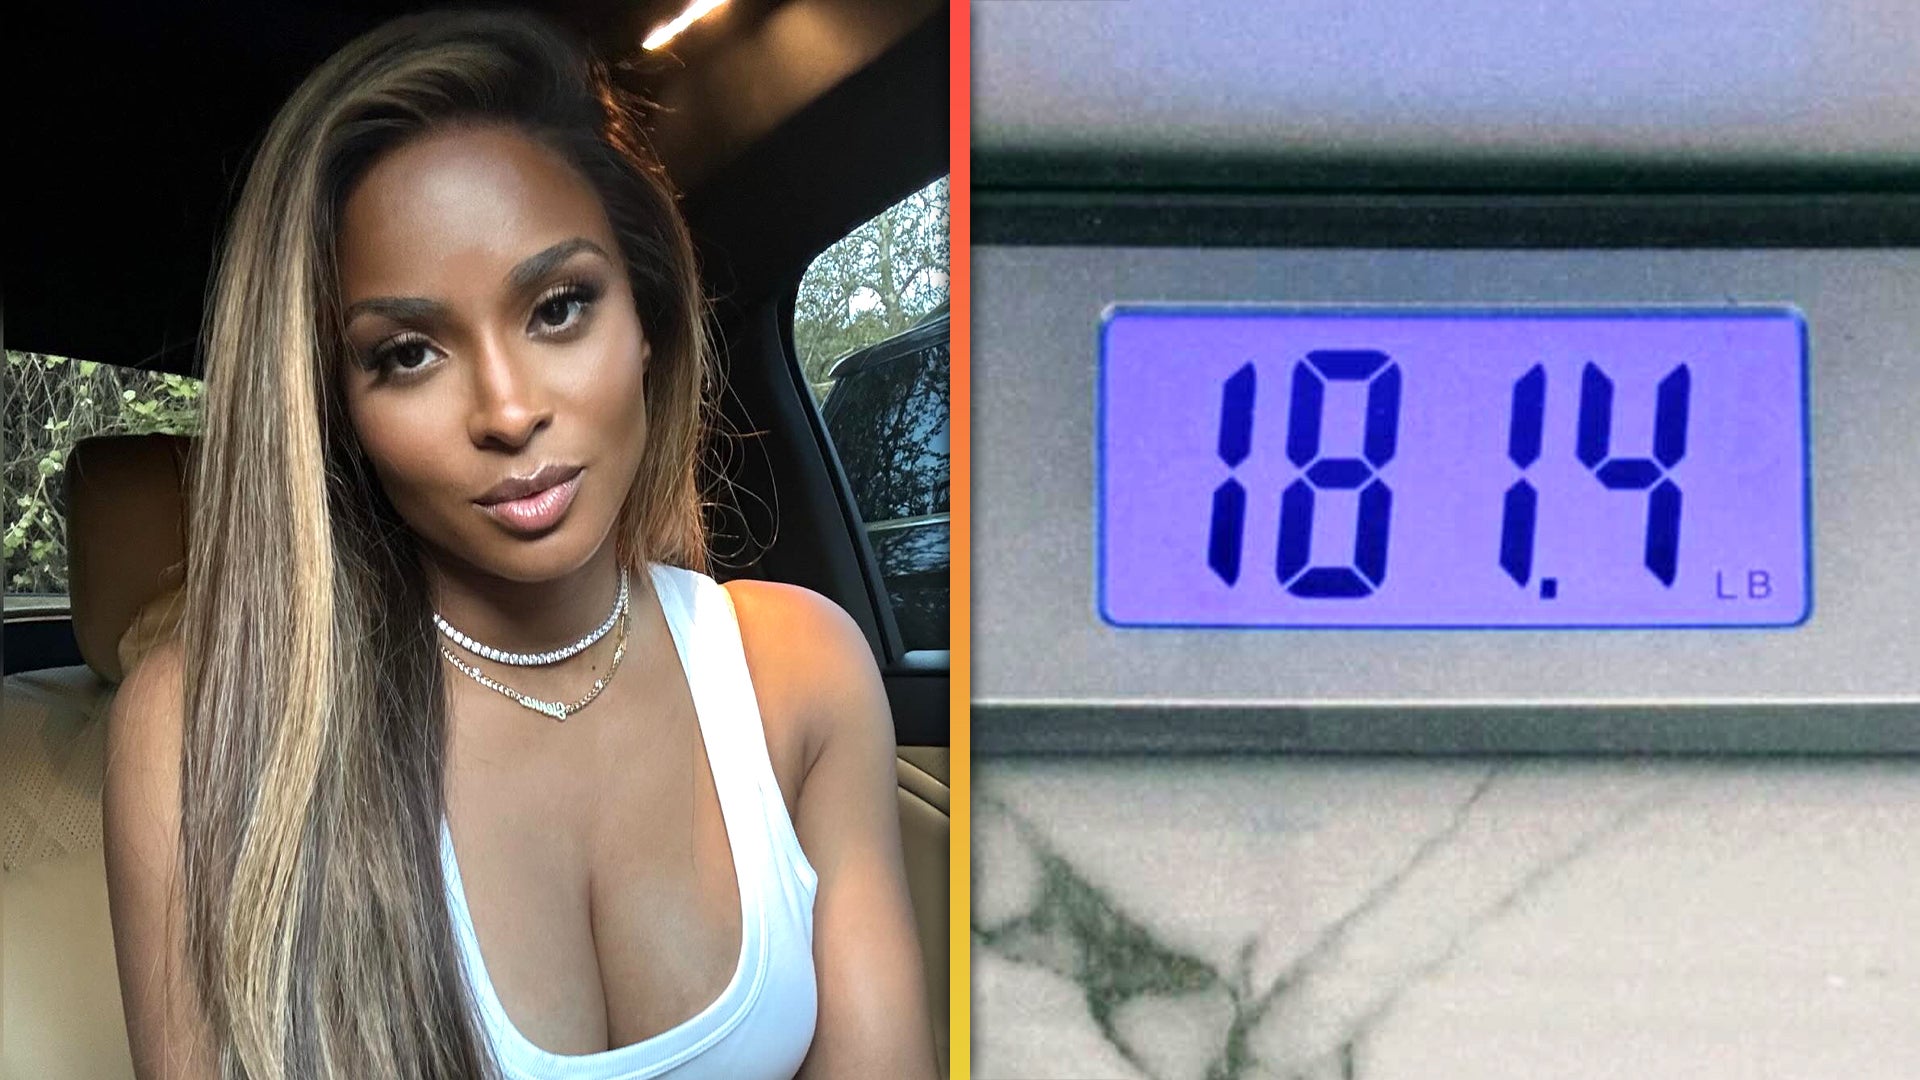 Ciara Shares Her Weight on a Scale After Declaring She's Trying to Lose 70 Pounds